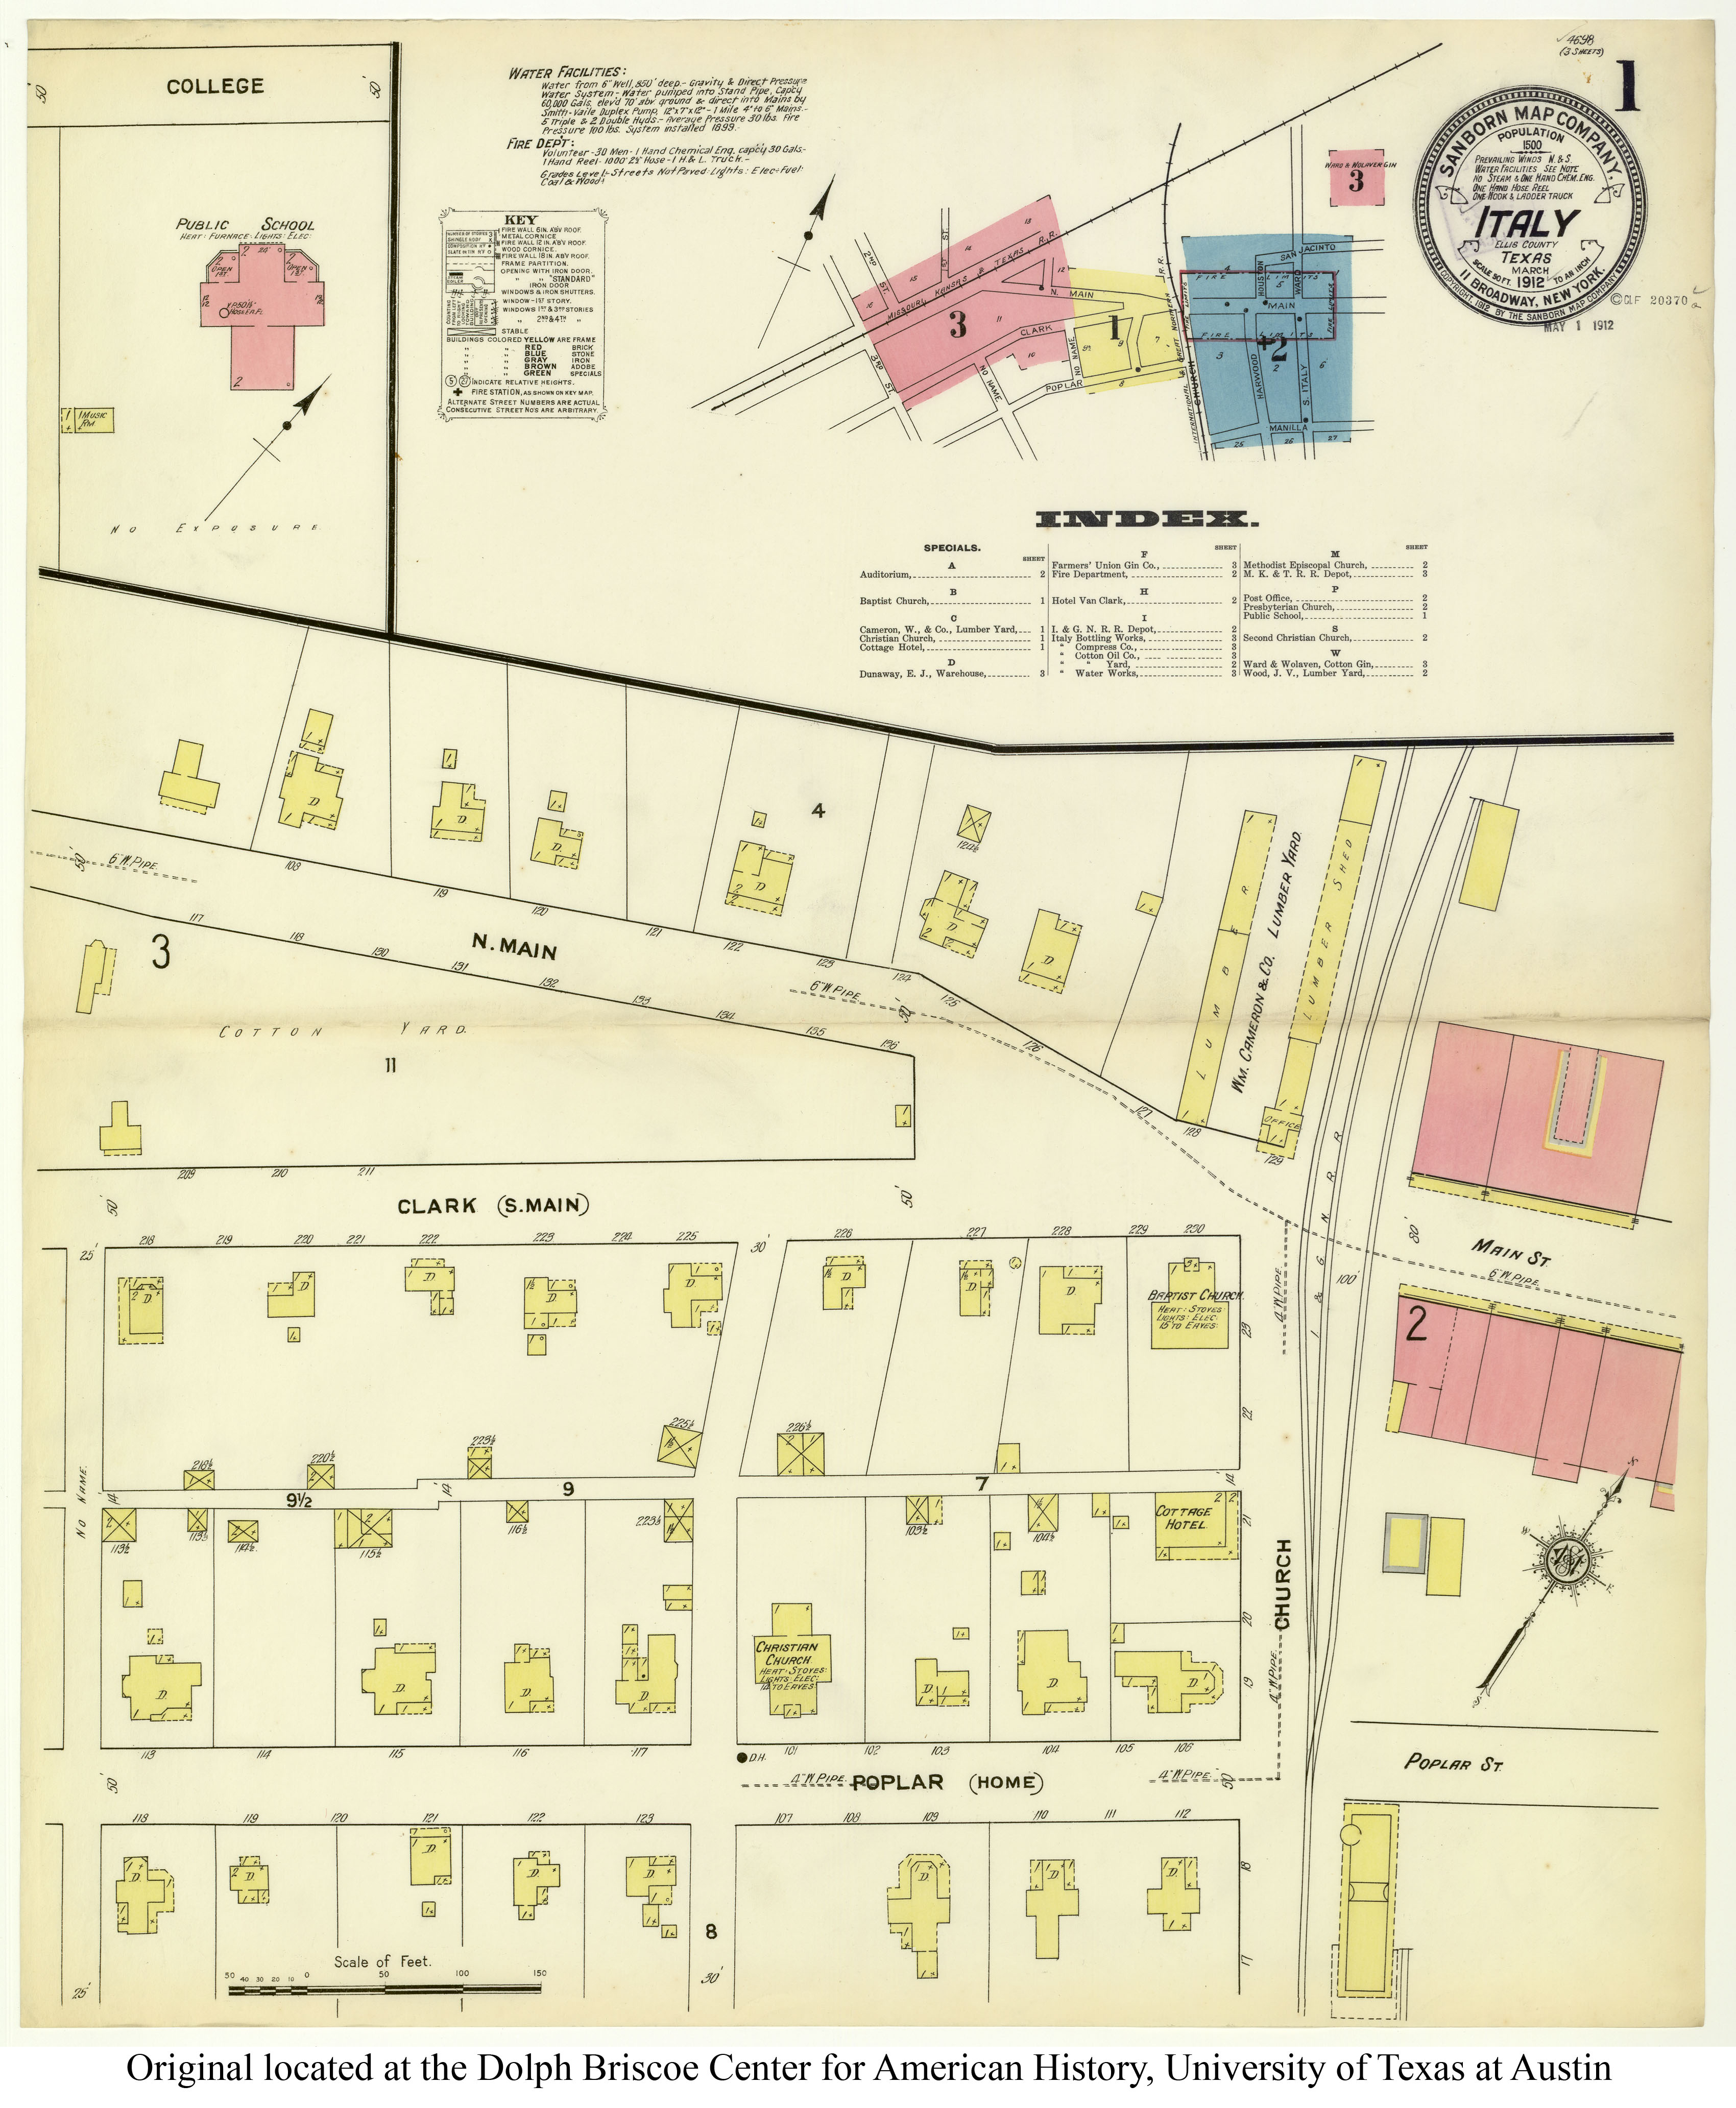 Sanborn Maps Of Texas - Perry-Castañeda Map Collection - Ut Library - Italy Texas Map